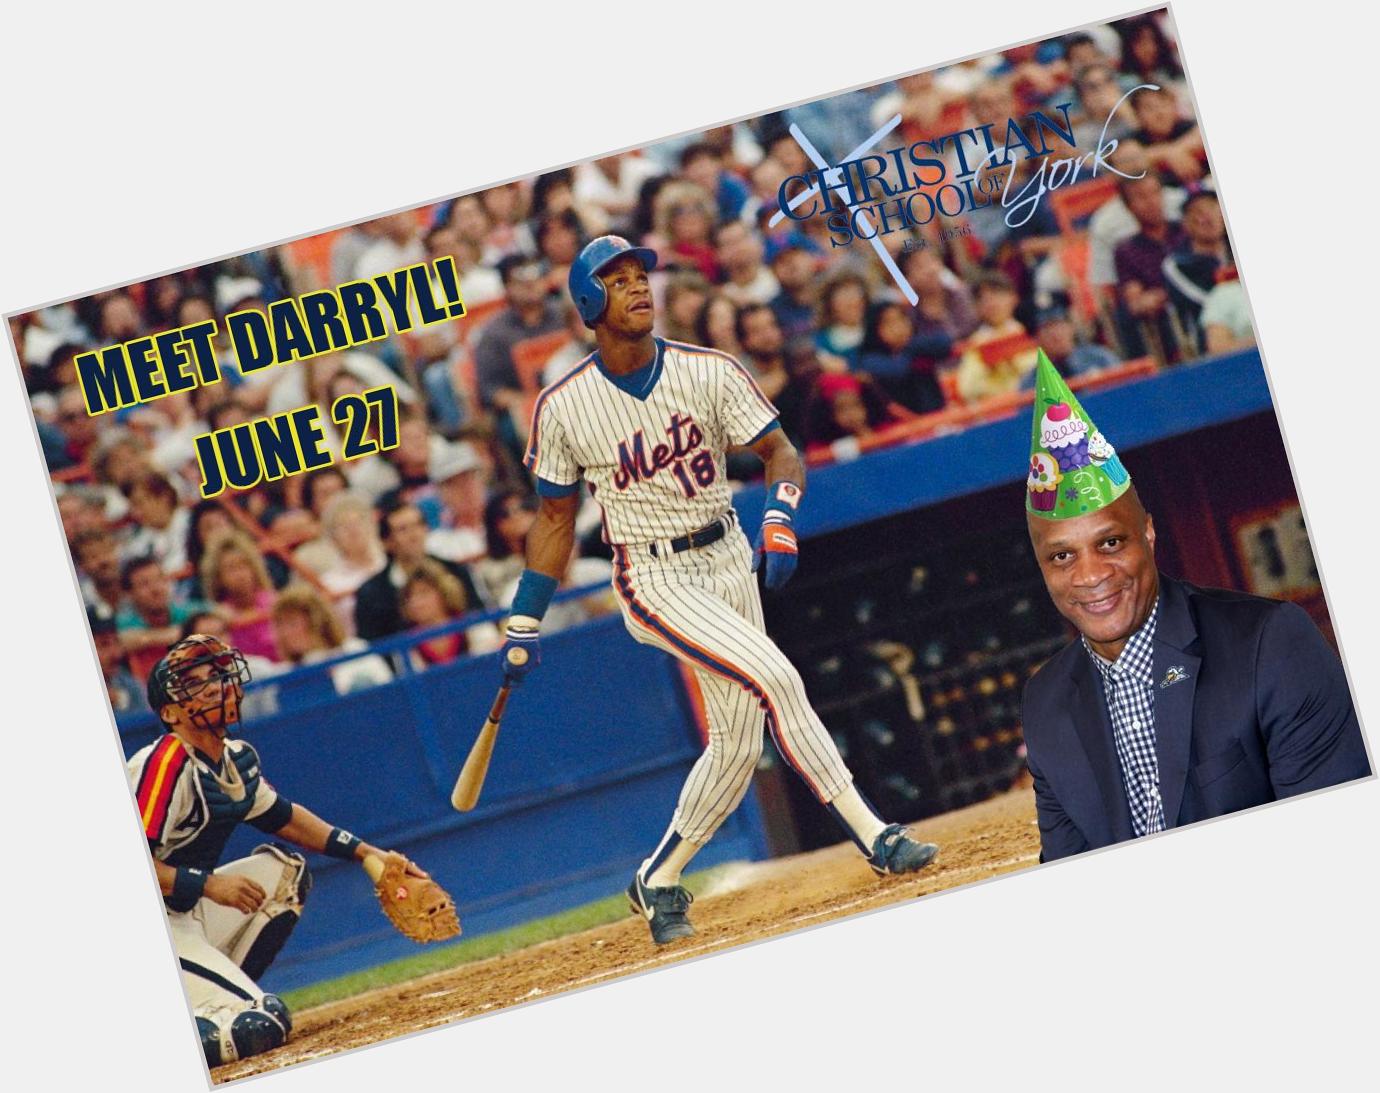 Happy Birthday Darryl Strawberry!  He\ll be at the game on Sat. June 27! Tickets:  